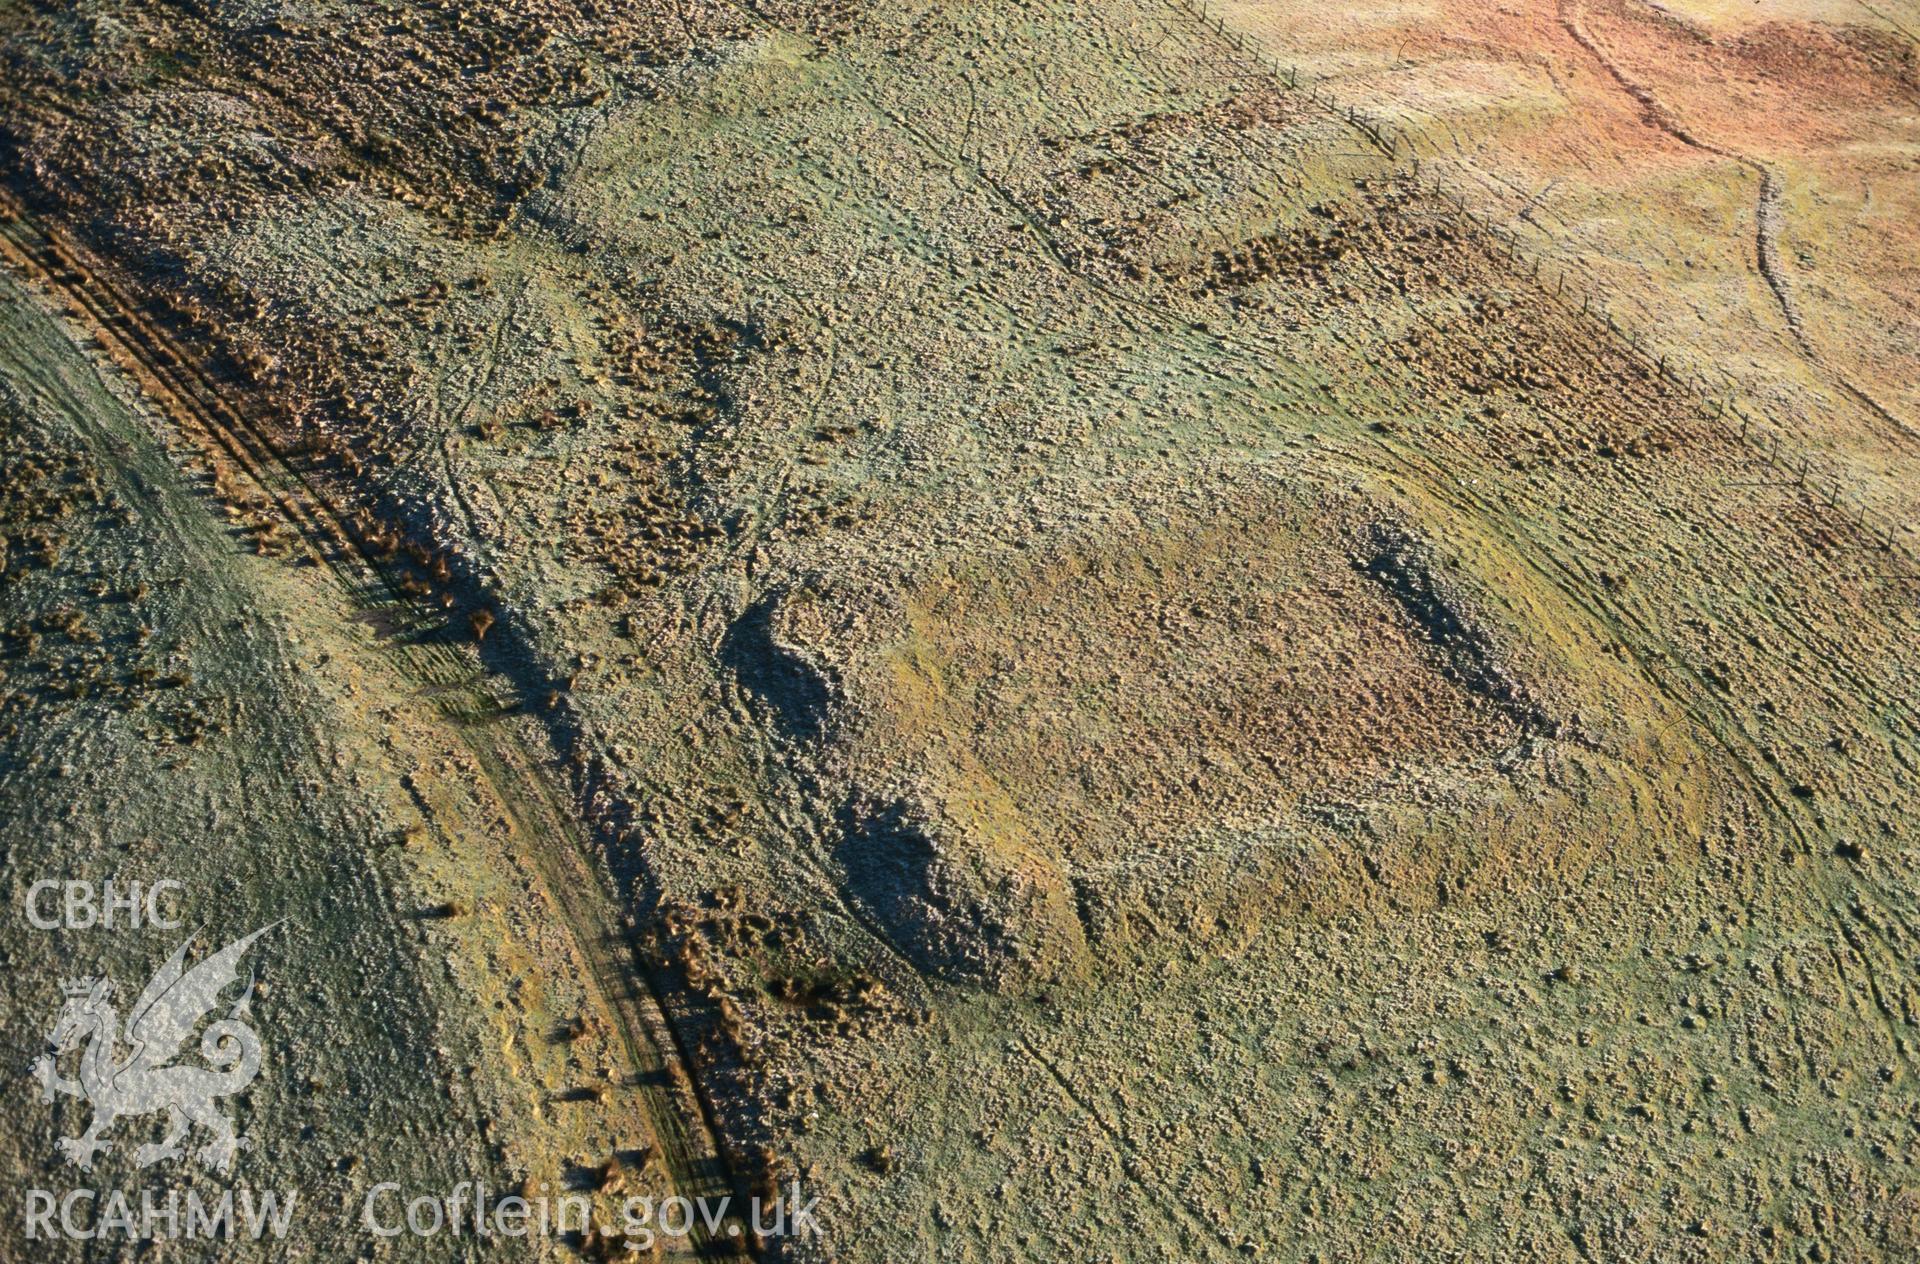 Slide of RCAHMW colour oblique aerial photograph of Pen Y Crogben Roman Signal Station, taken by C.R. Musson, 20/12/1998.